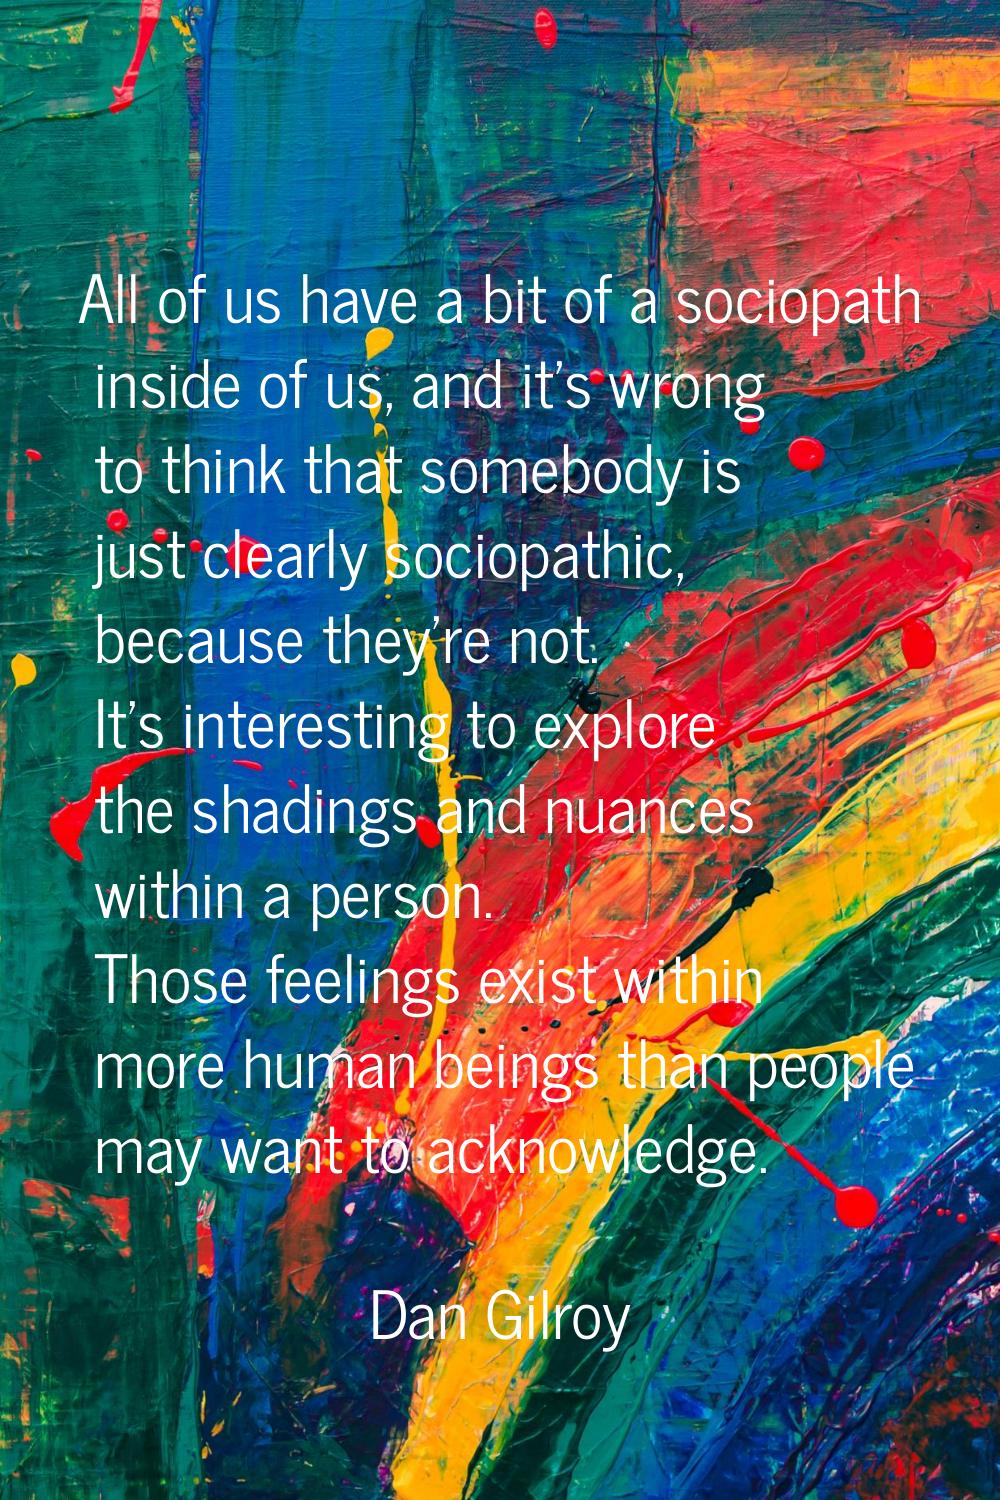 All of us have a bit of a sociopath inside of us, and it's wrong to think that somebody is just cle